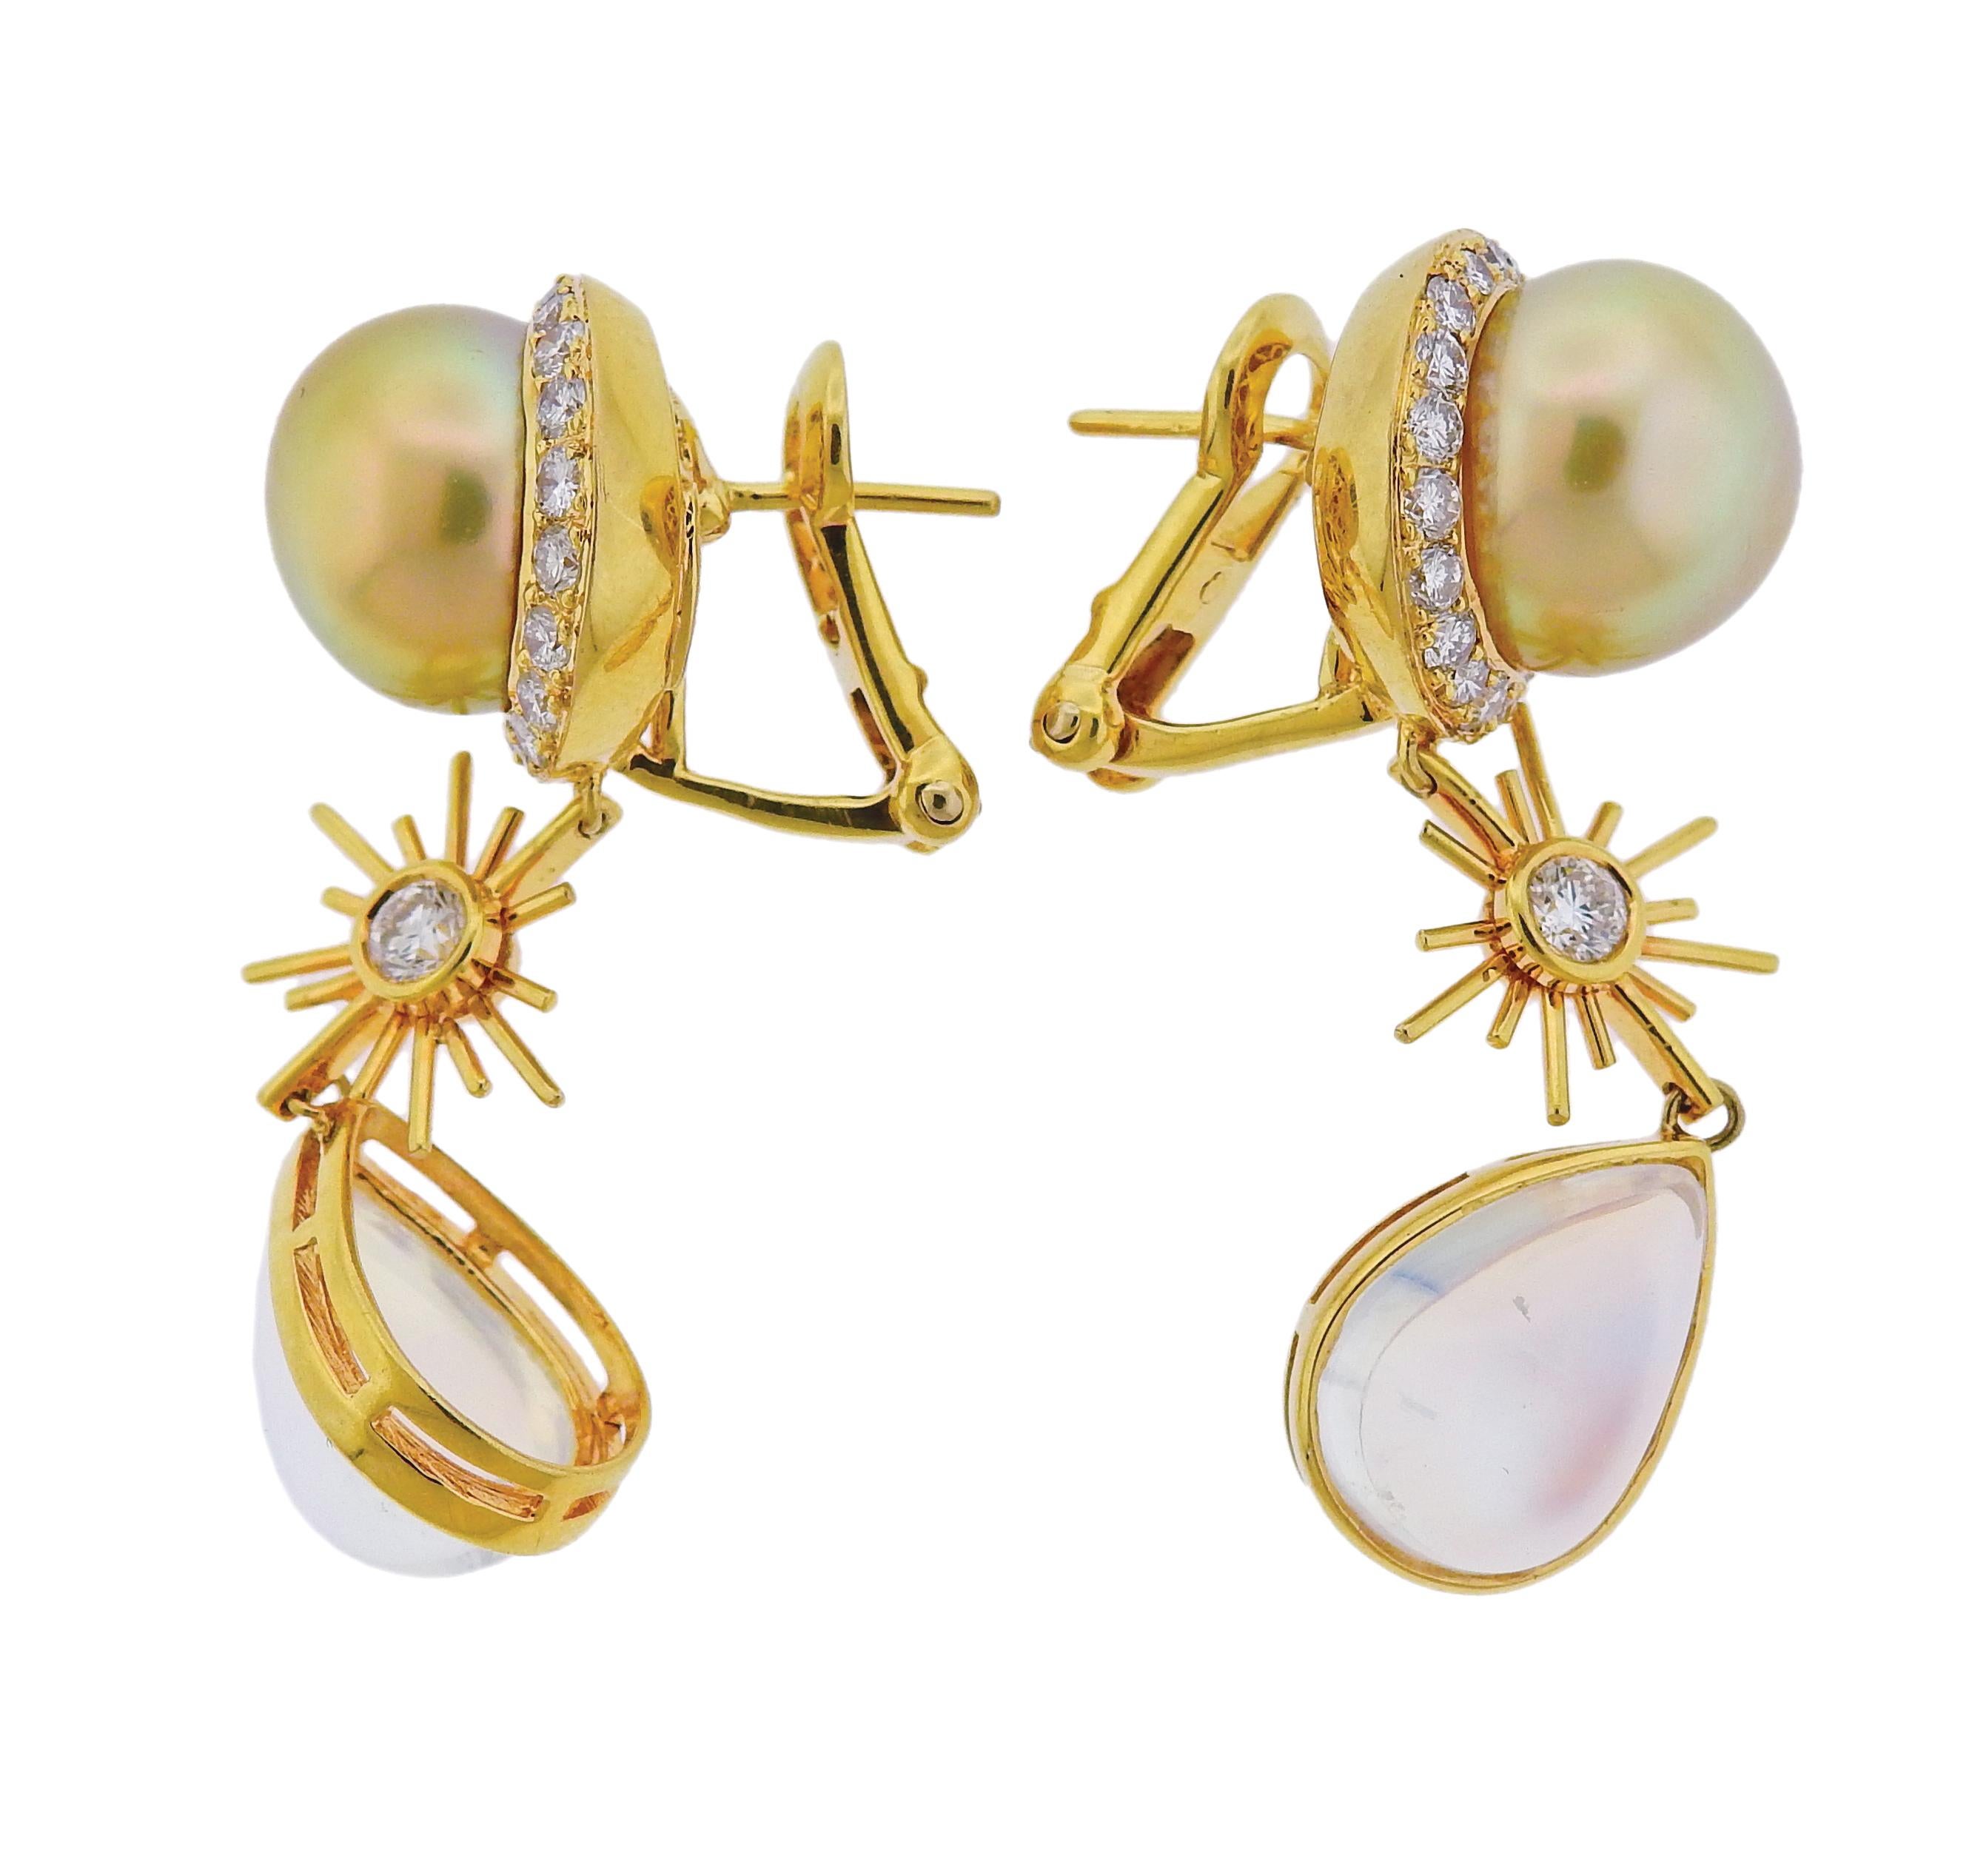 Brand new pair of 18k yellow gold drop earrings by Prince Dimitri, set with 10.30cts in moonstones, 0.97ctw G/VS diamonds and 12mm golden South Sea pearls. Retail $7300. Earrings are 44mm long x 15mm wide. Weigh 17.8 grams. Marked: Prince Dmitri